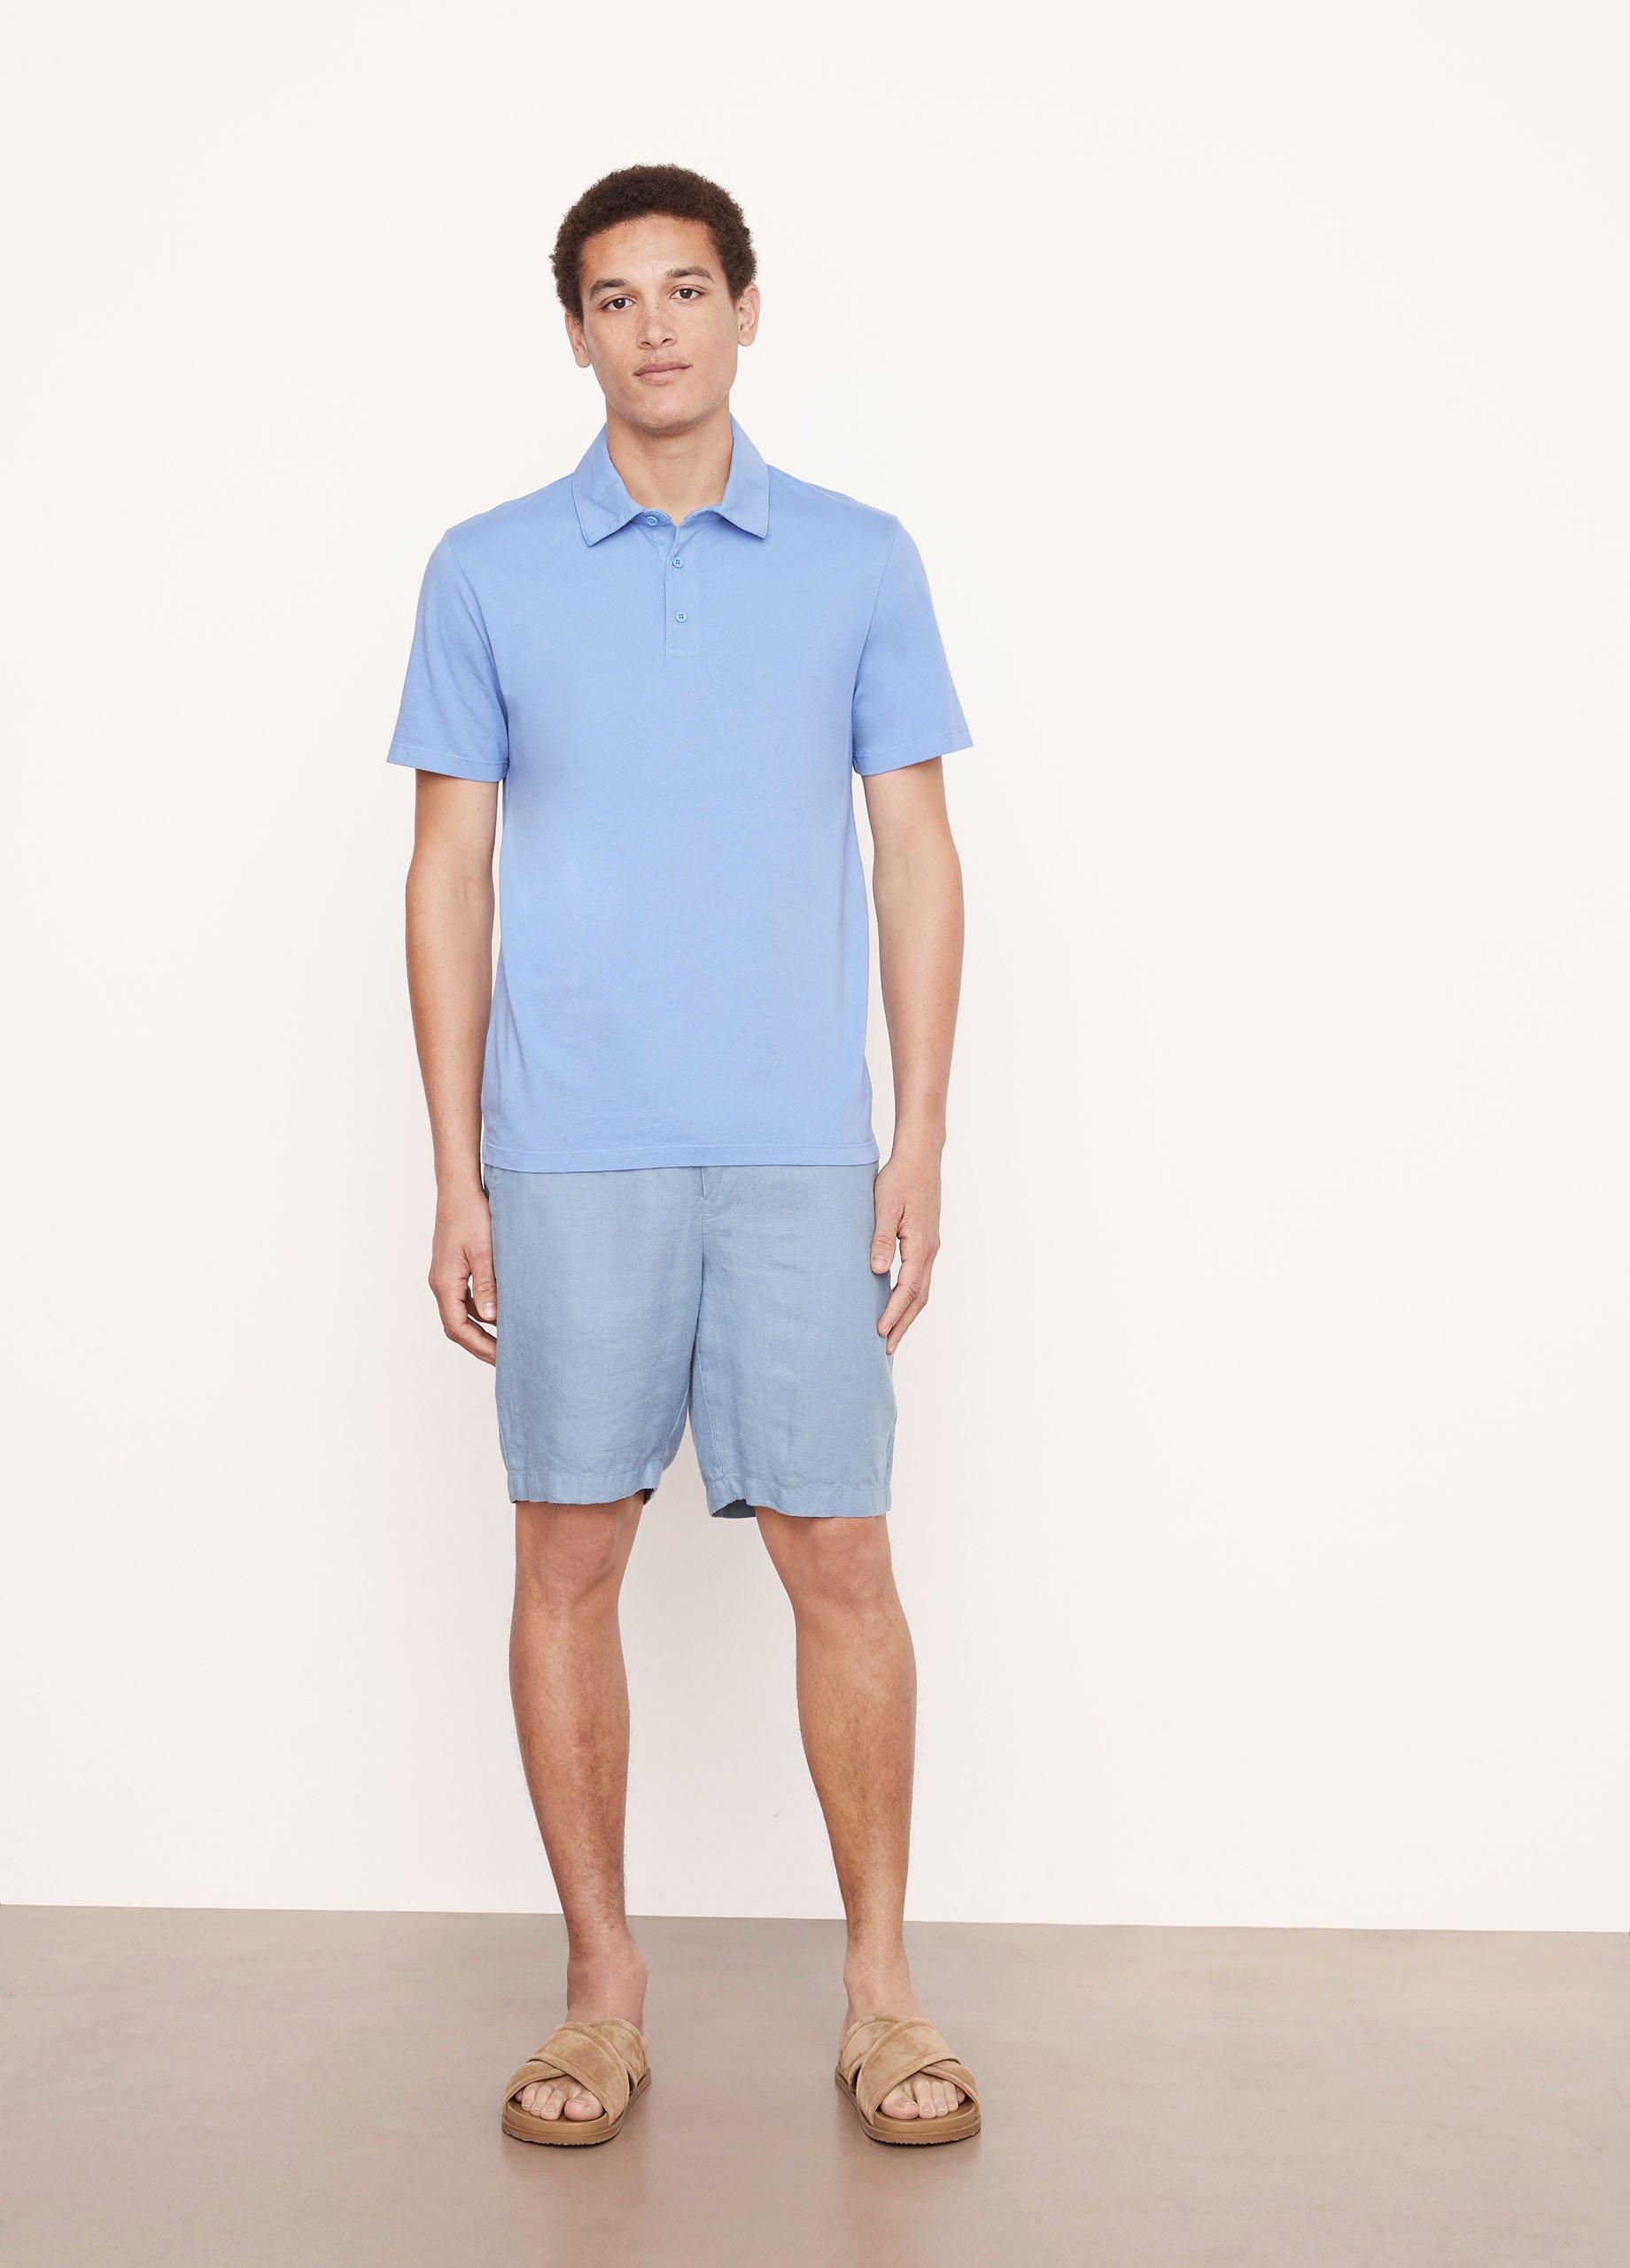 garment dye short-sleeve polo shirt, washed periwinkle, size l vince